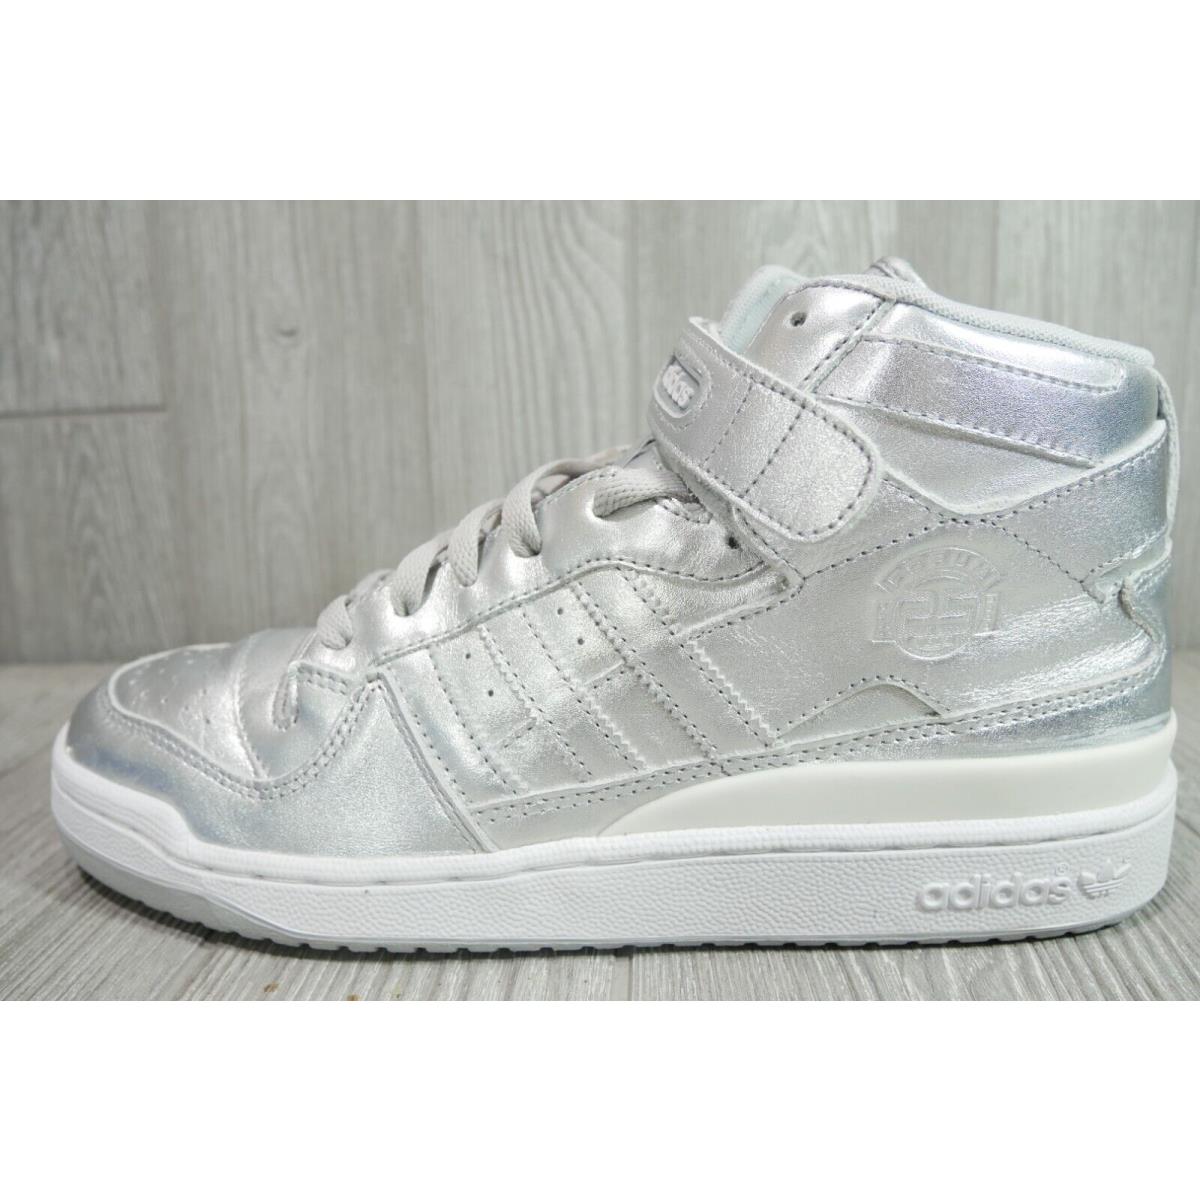 Vintage Adidas Forum Silver Mid 25 Year Anniversary Shoe 2008 Mens 11 Oss